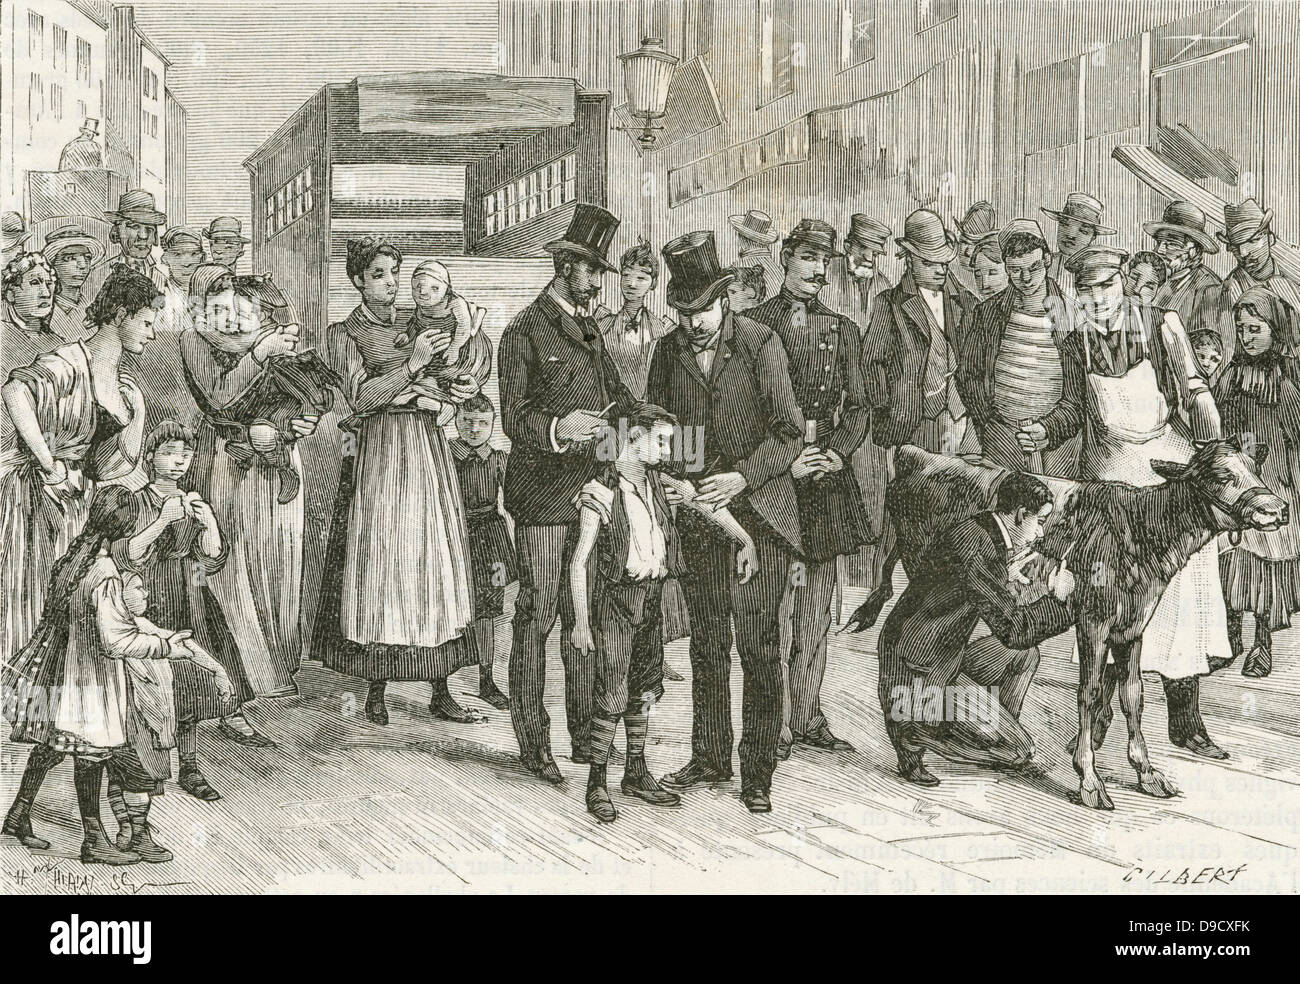 Public vaccination in Paris. Heffer infected with cowpox was taken round in a van. Serum from its side and scratched directly into then arms  or people waiting. From La Nature, Paris, 1893. Stock Photo